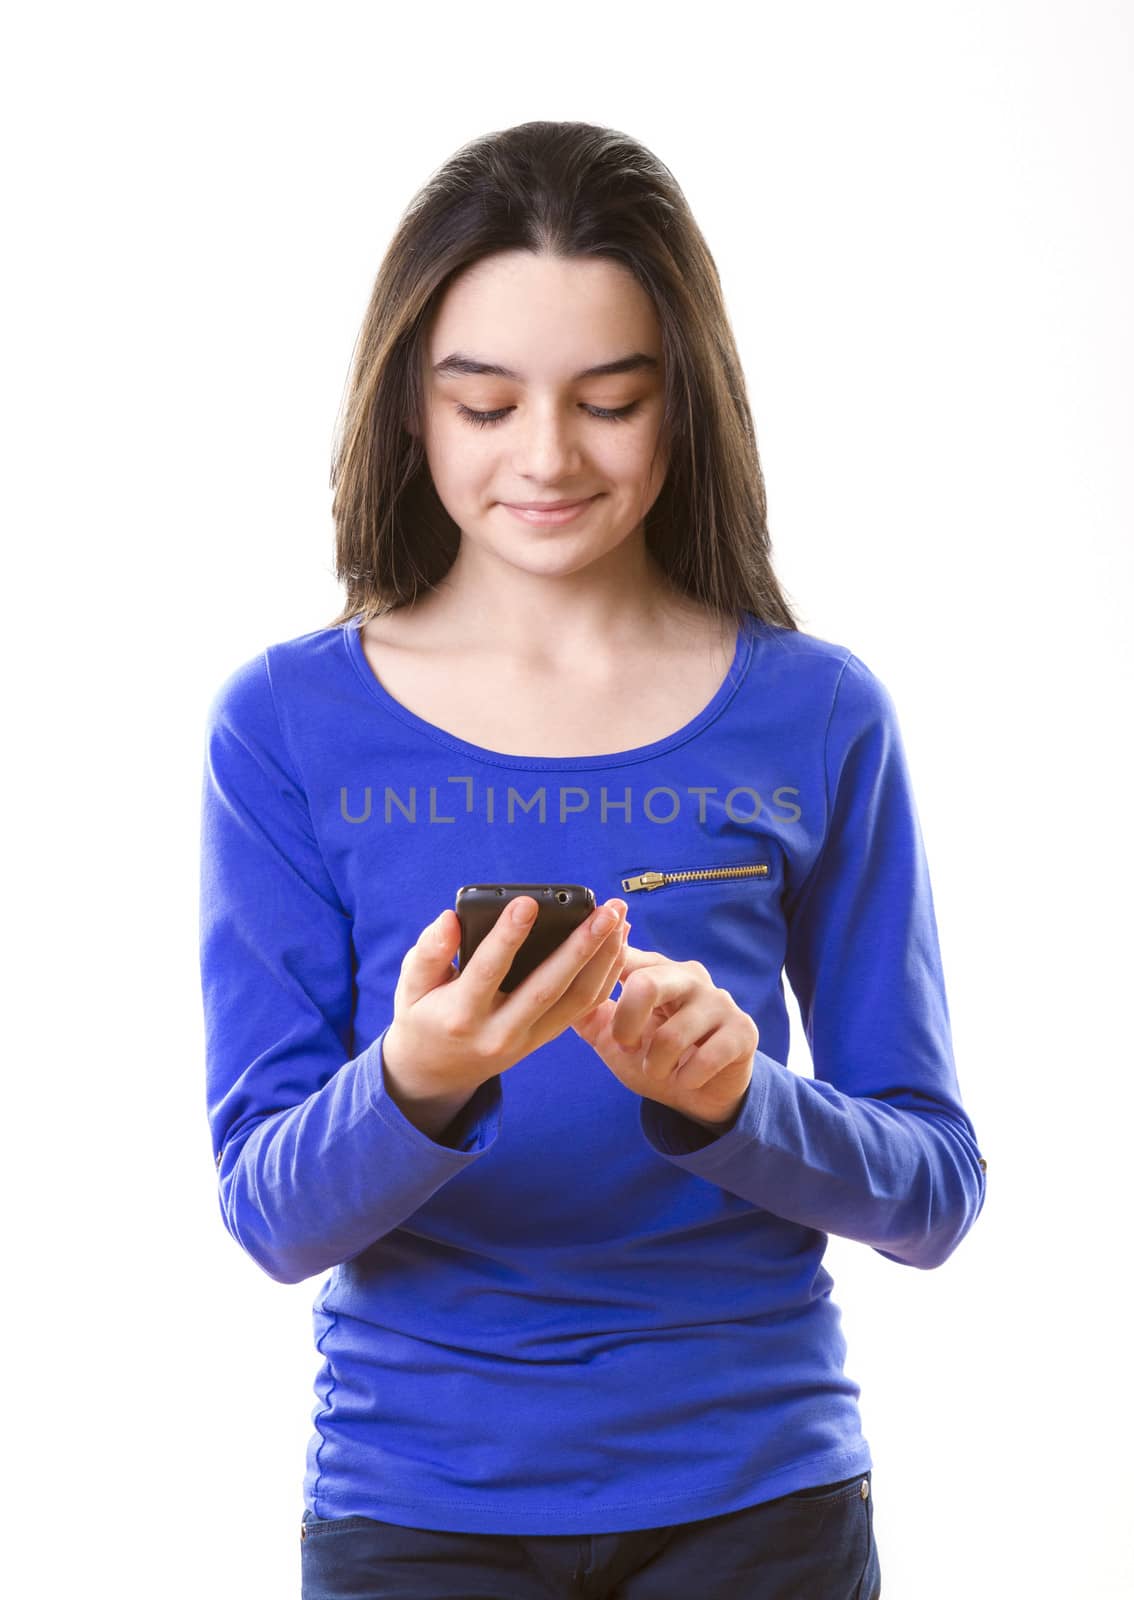 Teenage girl with smartphone on white background.
